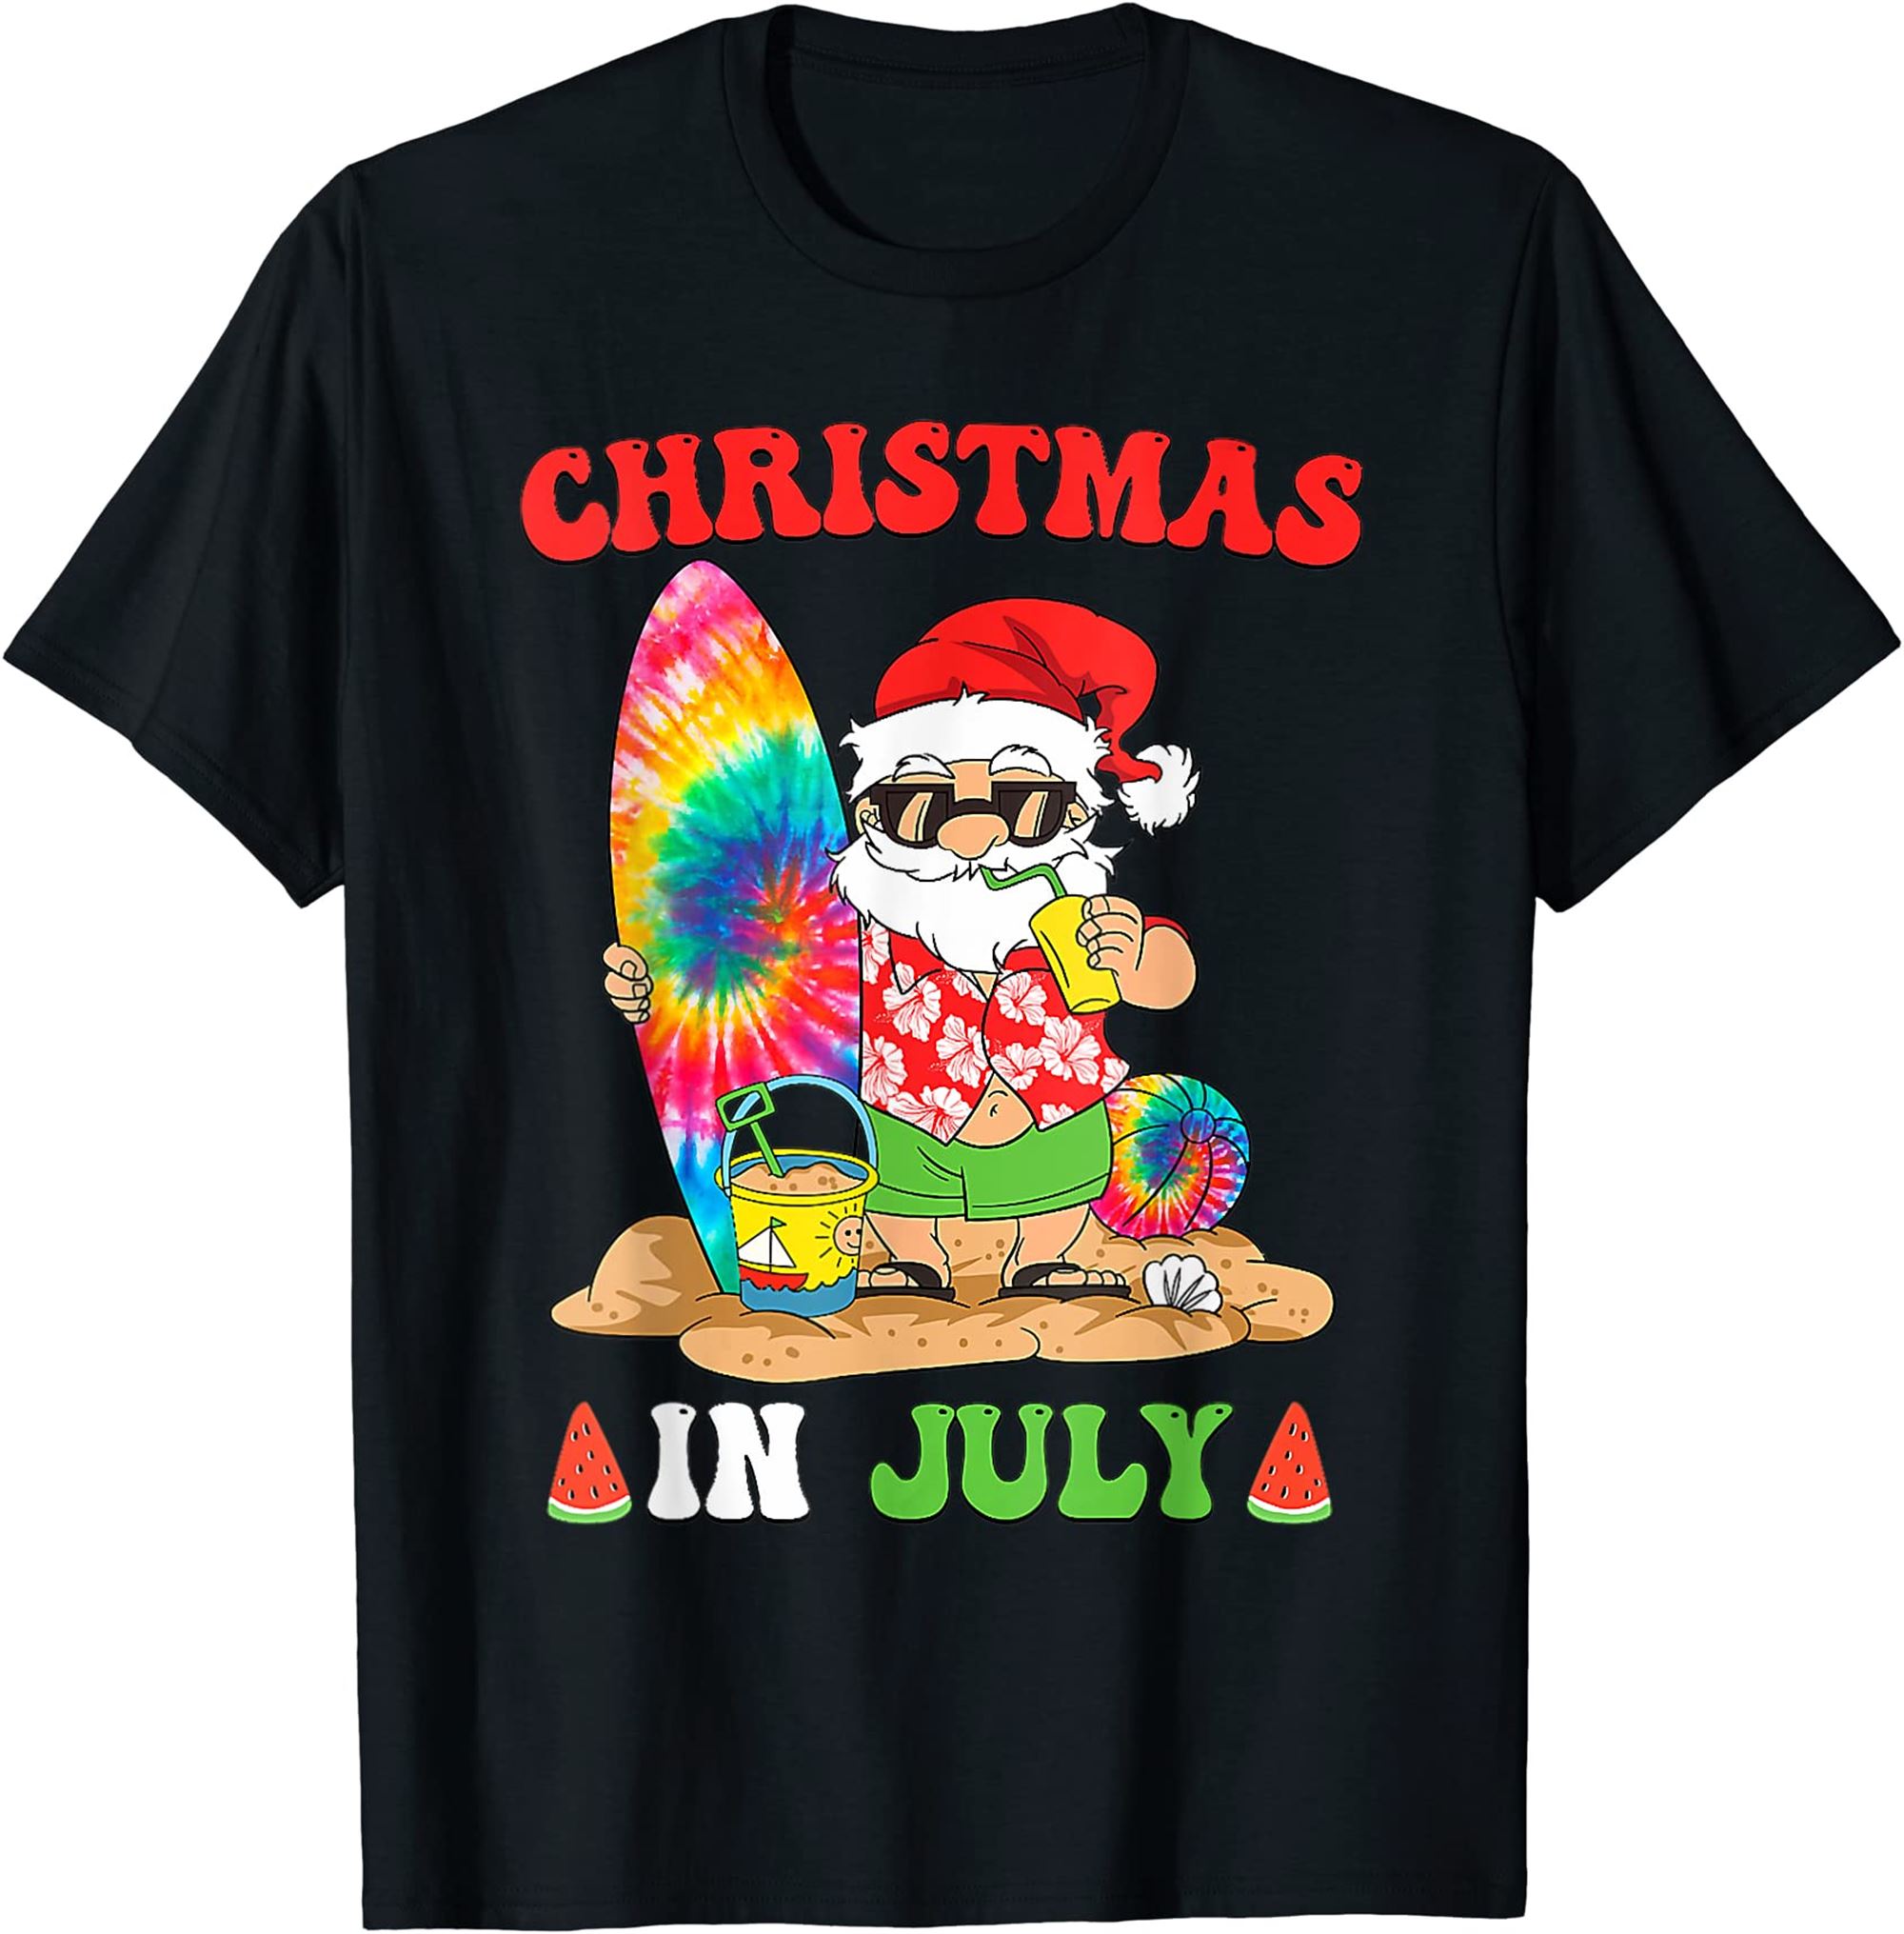 Christmas In July Santa Tie Dye Summer Surf Surfing Surfer T-shirt Size Up To 5xl